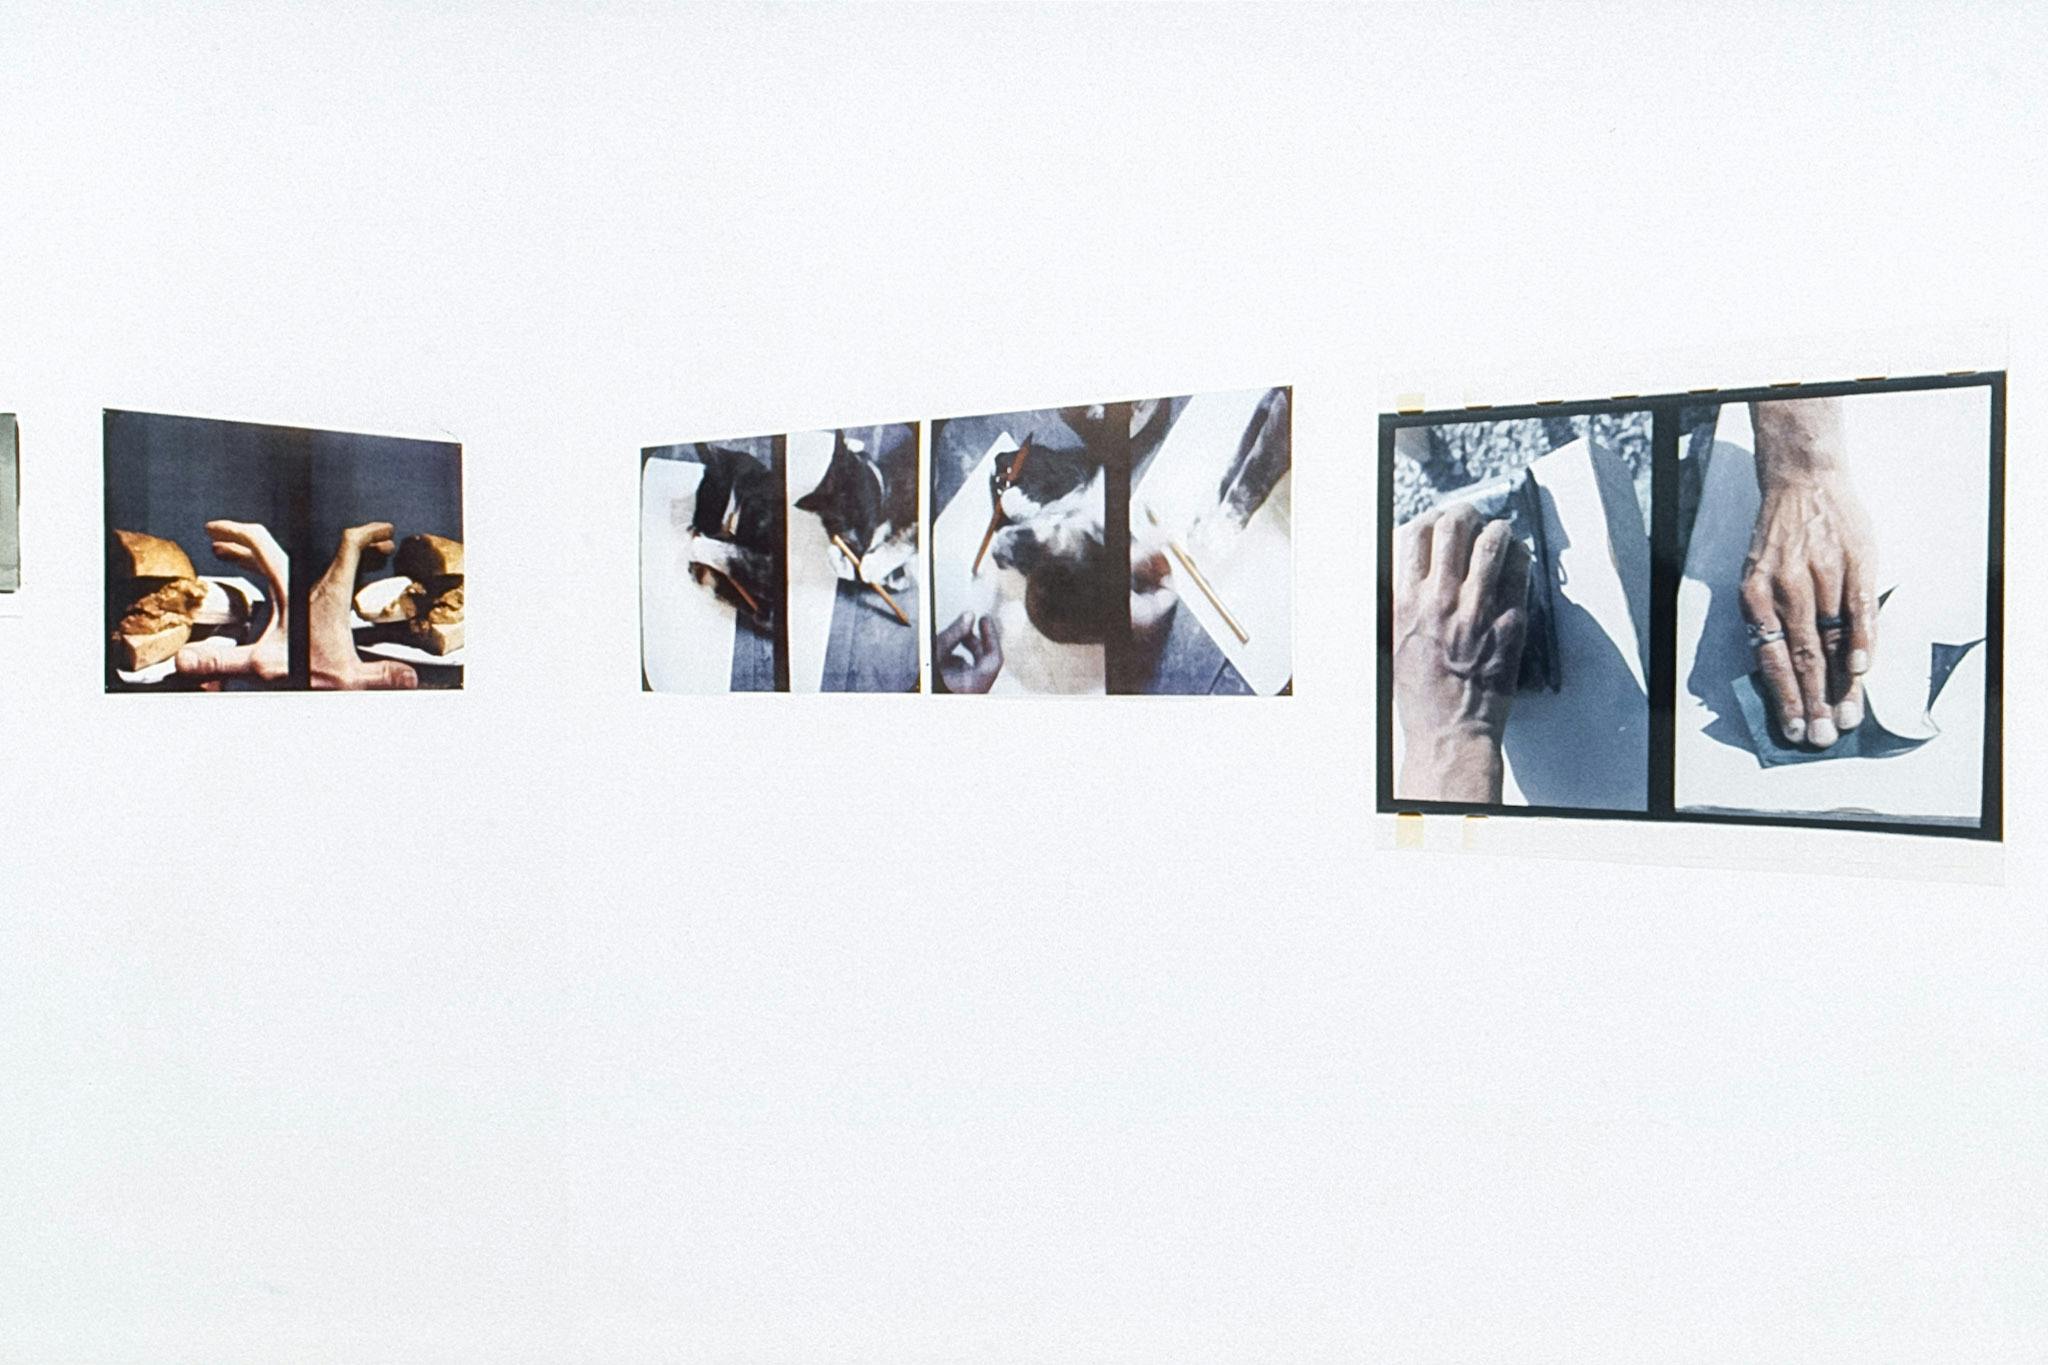 A closeup of the corner of a gallery, with 3 sets of photos on the walls. One set contains 2 photos of a hand and a sandwich. One set shows a cat playing with a pen. One set shows a hand sanding wood.